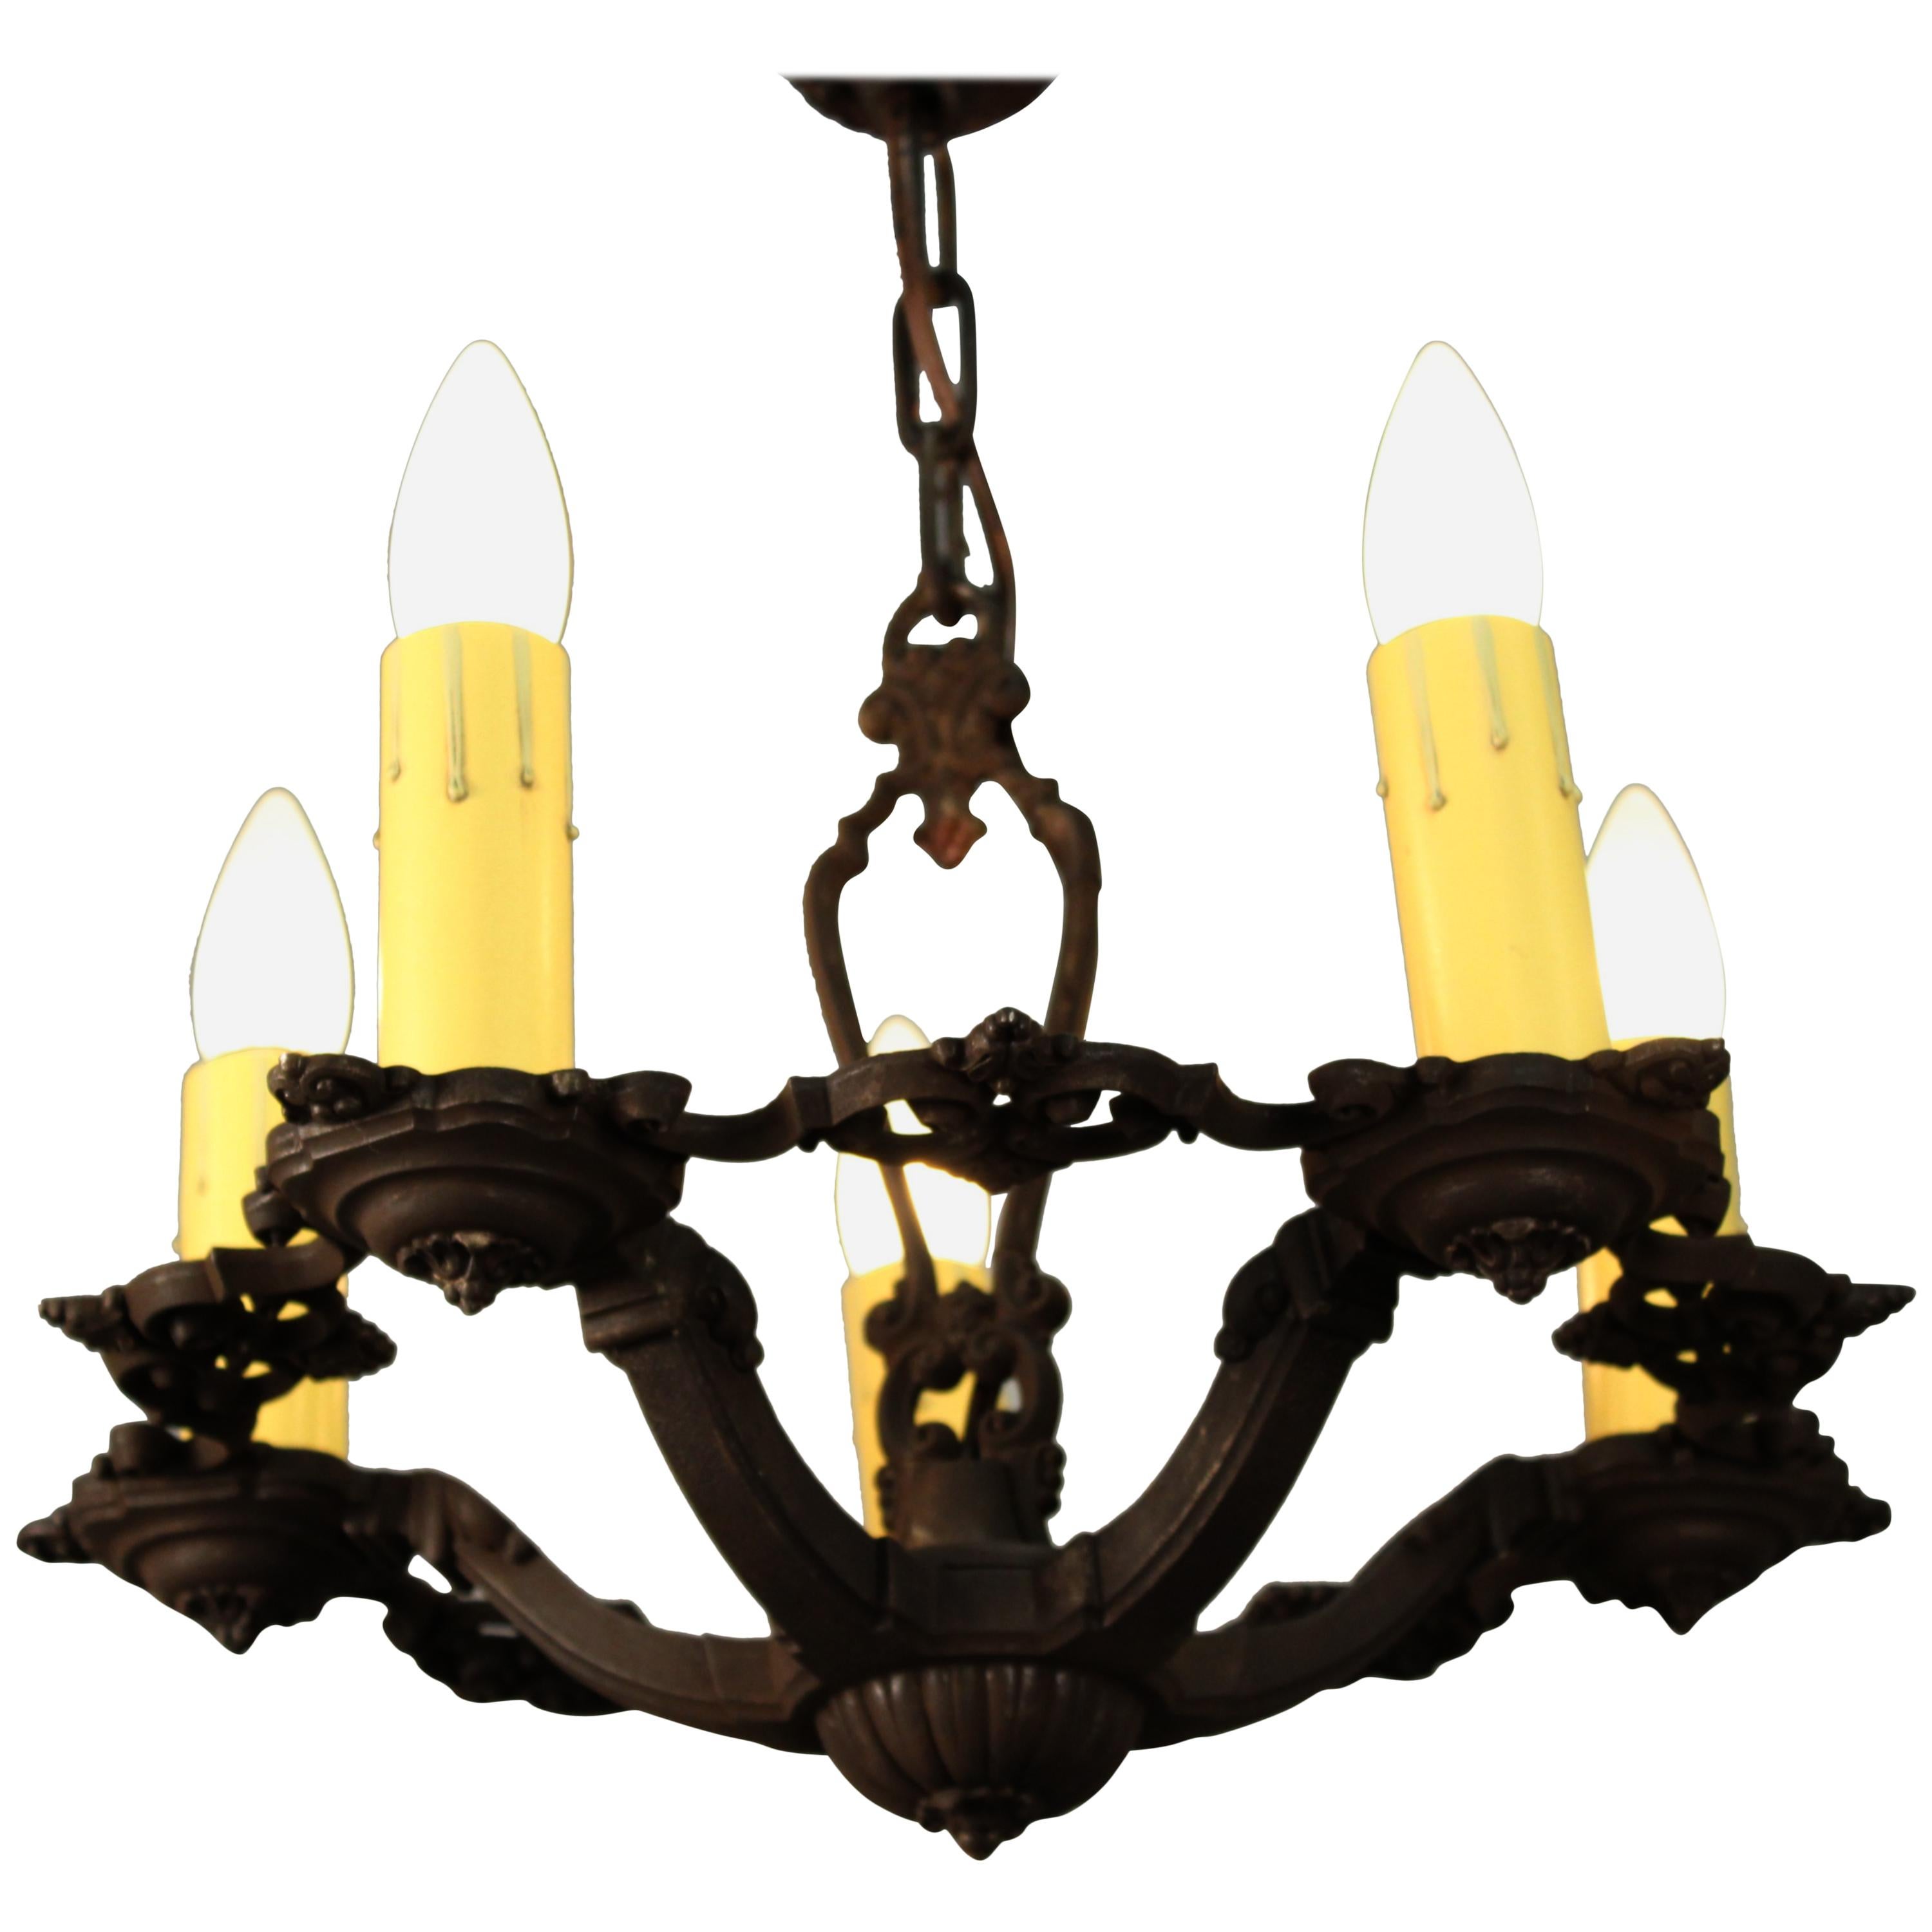 1920s Spanish Revival Chandelier with Five Lights